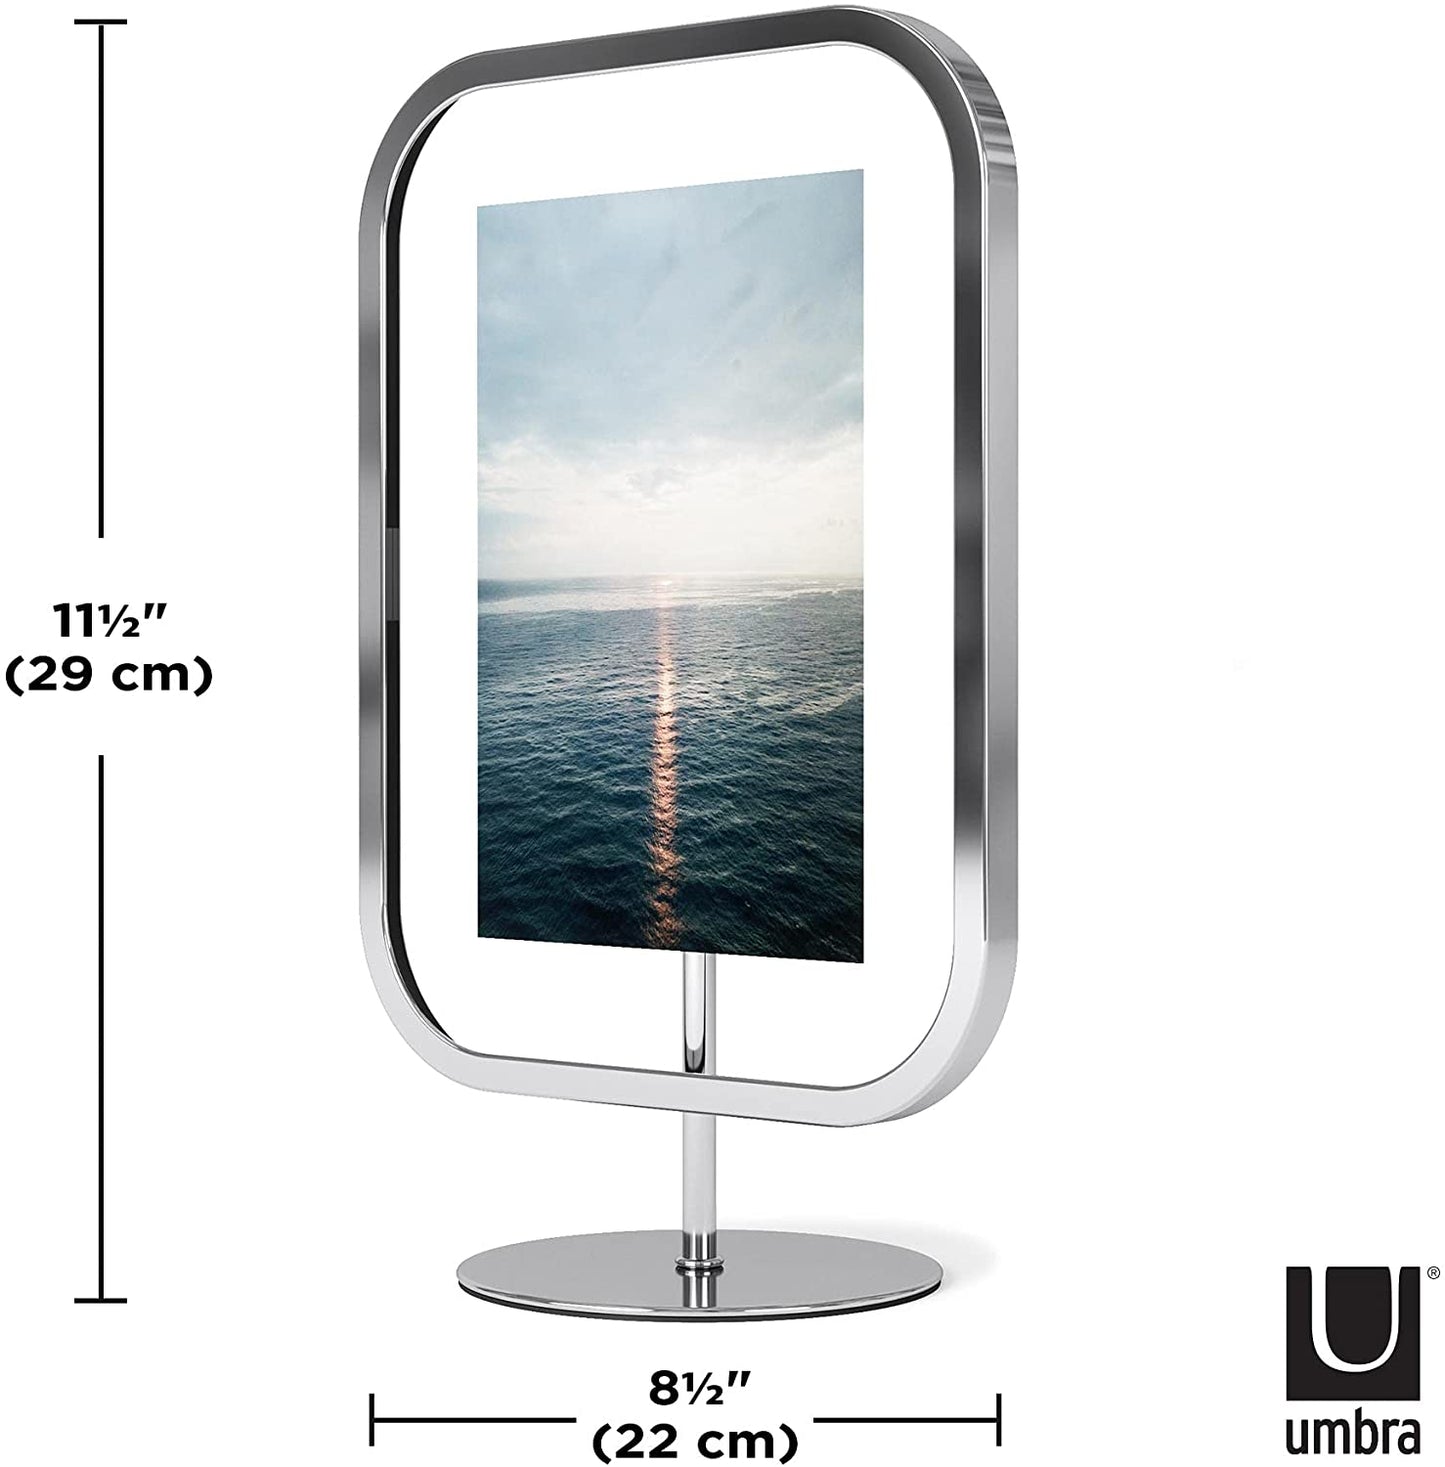 Umbra Infinity Square Floating Picture Frame